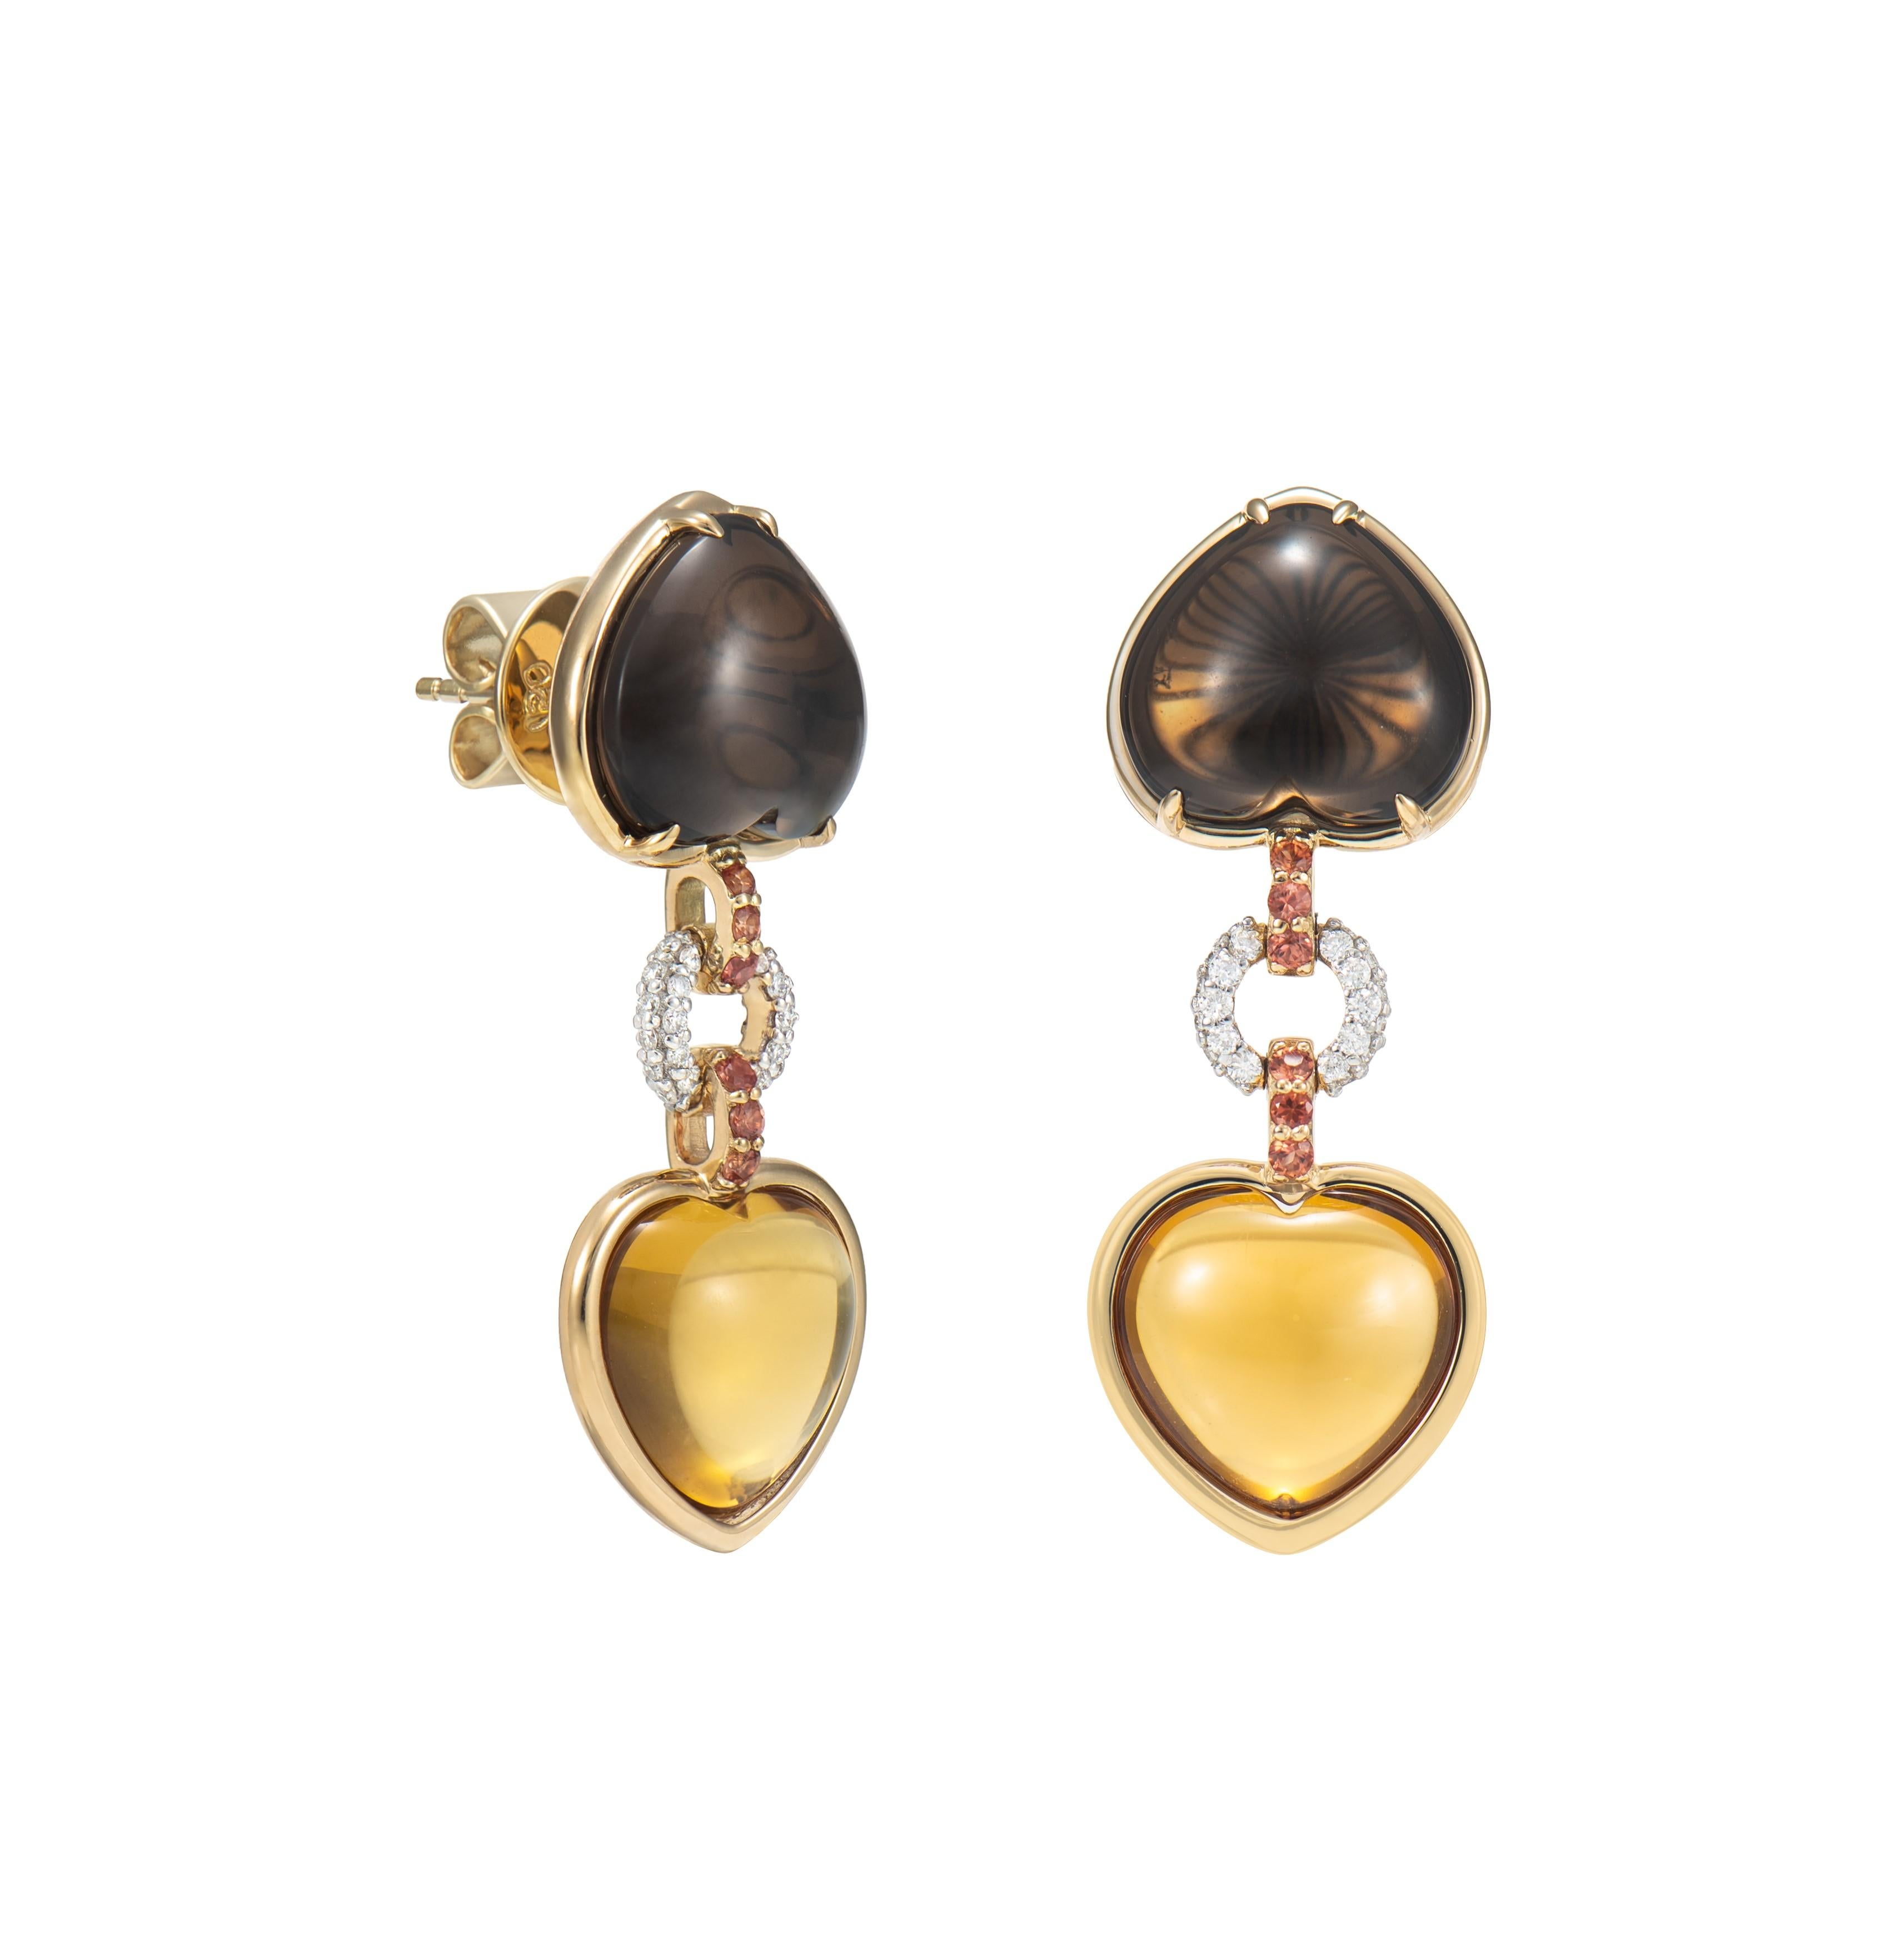 Celebrating the season of love with these delicate heart jewels! These pieces showcase beautiful gemstones with dainty accents to elevatue the beauty of the gem. 

Smoky Qartz and Honey Quartz Drop Earring in 18 Karat Yellow Gold with Orange